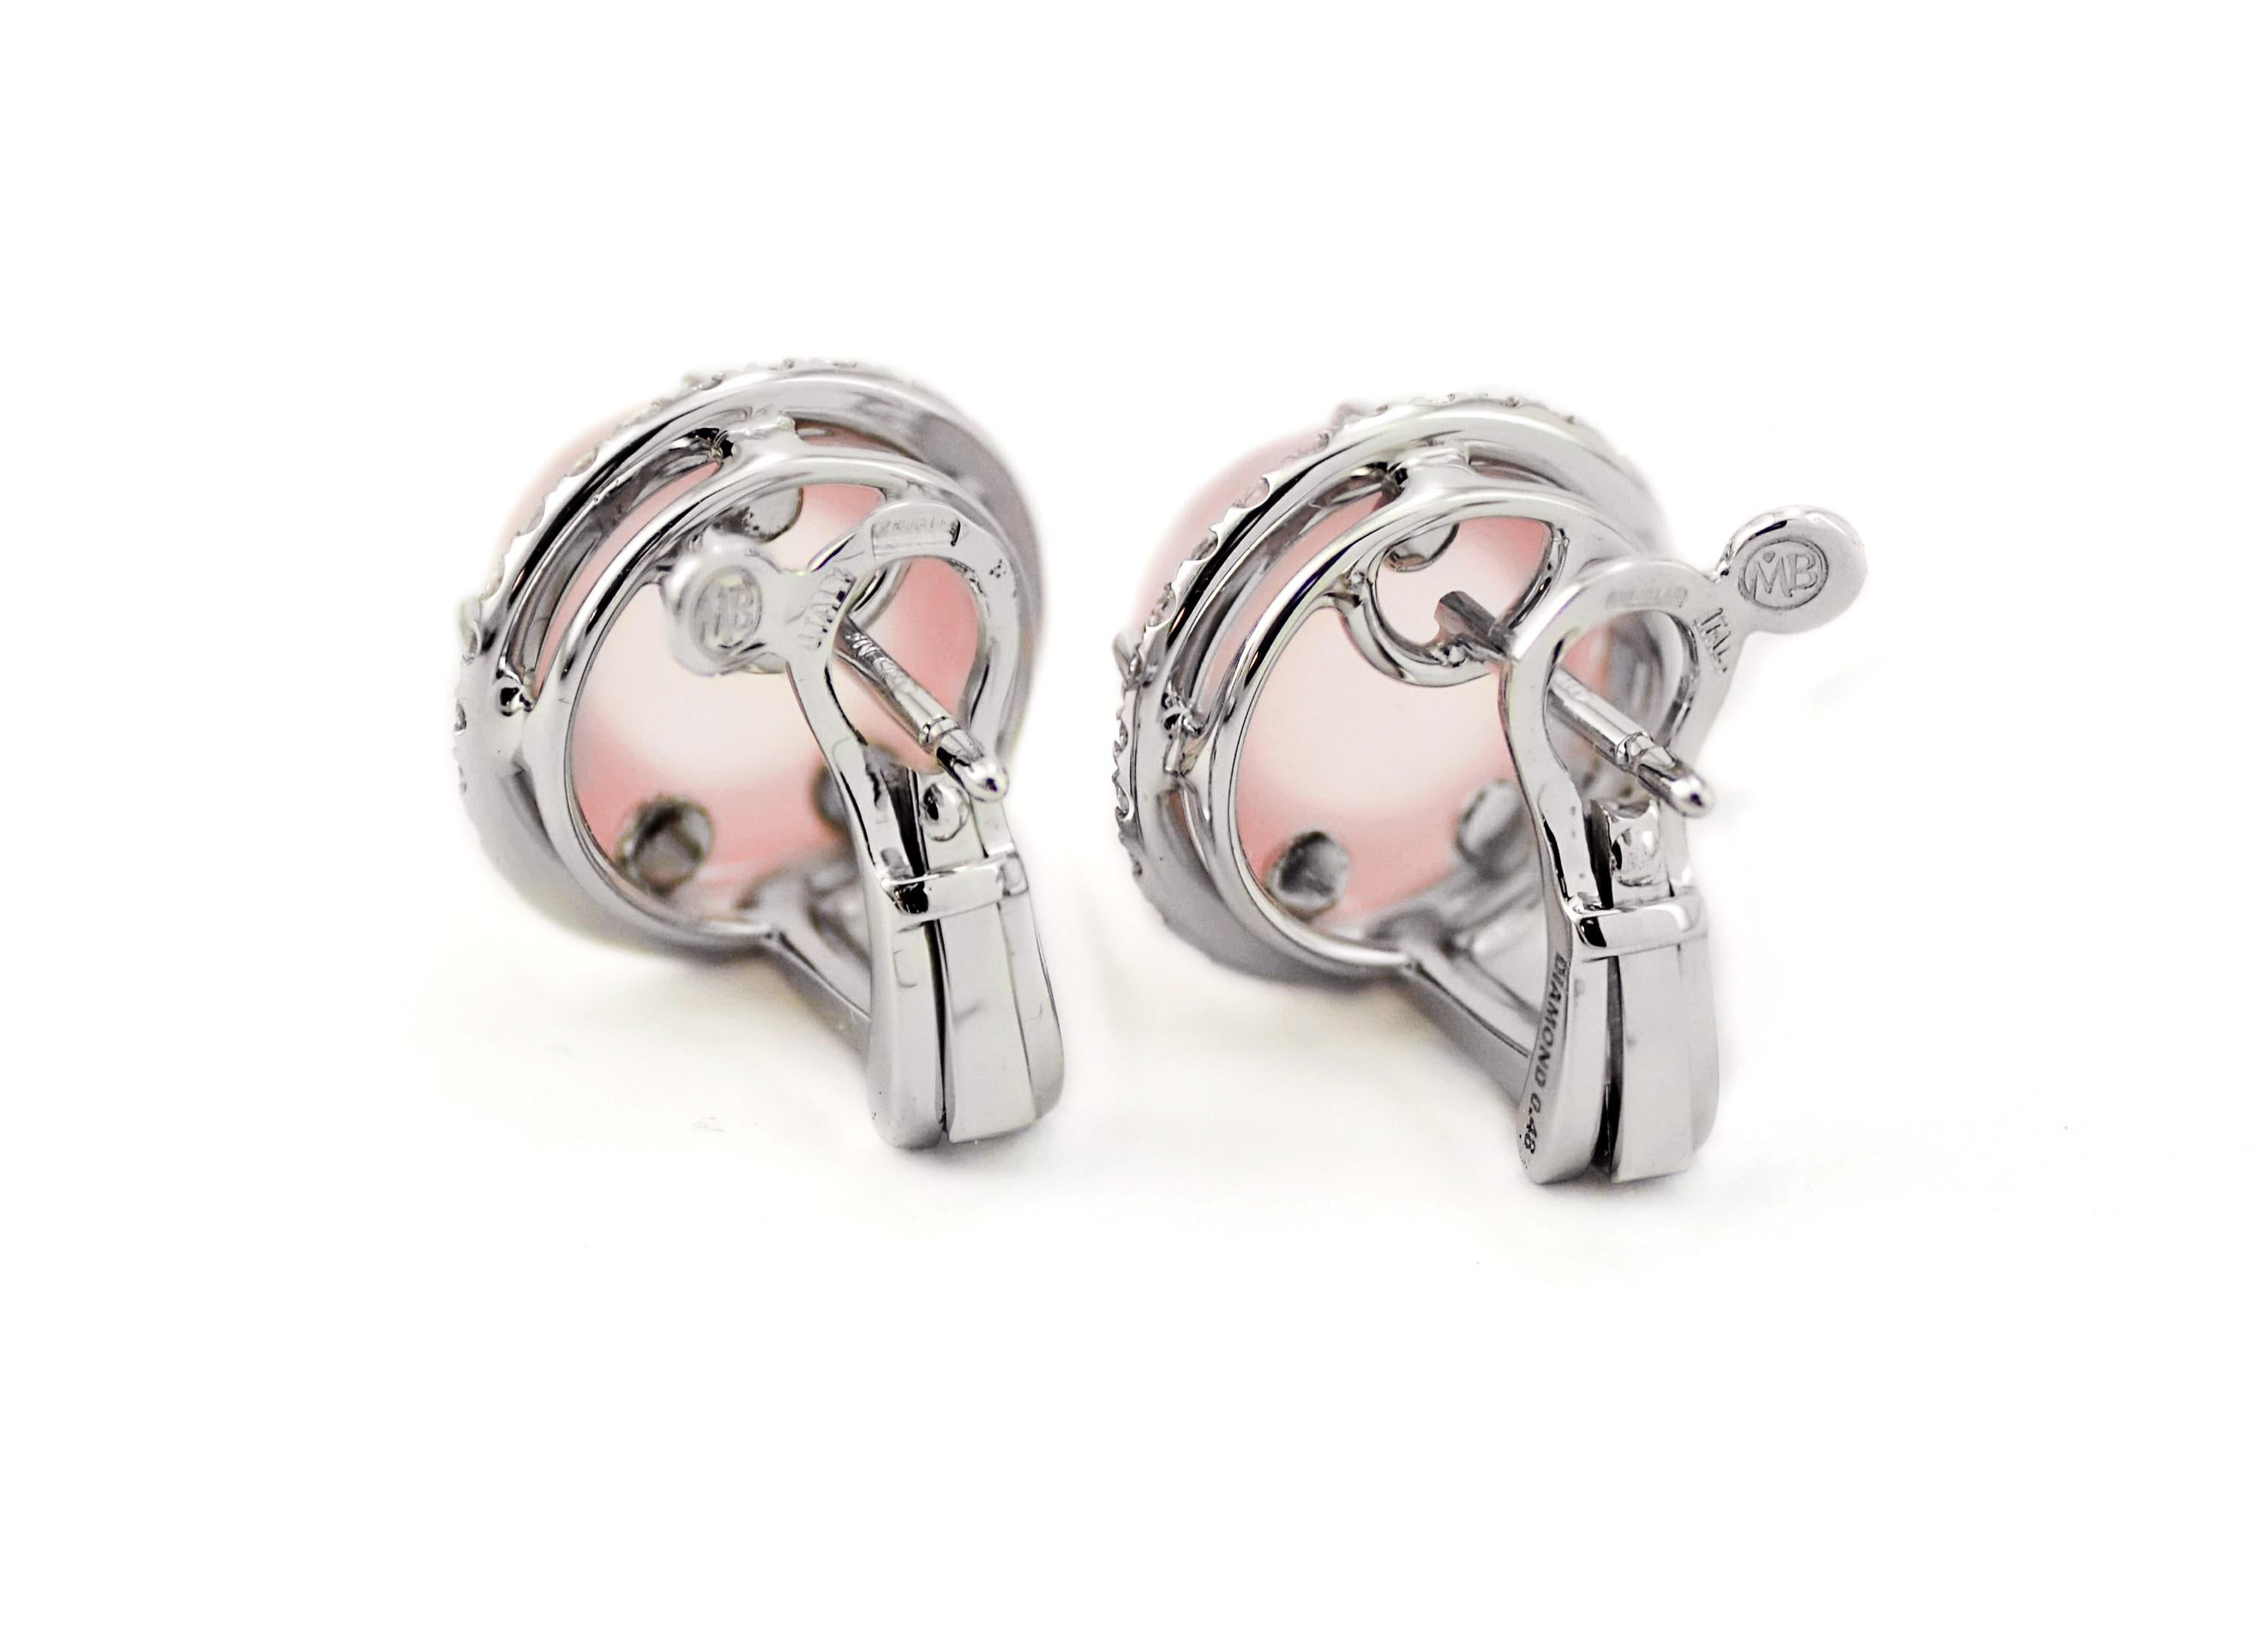 Handcrafted in Margherita Burgener family factory, based in Italy, the everyday chic pair of earclips are a true touch of elegance.
The handcrafting is extremely cared making them of great effect.

Handmade in 18K white gold, with fitting and clips.